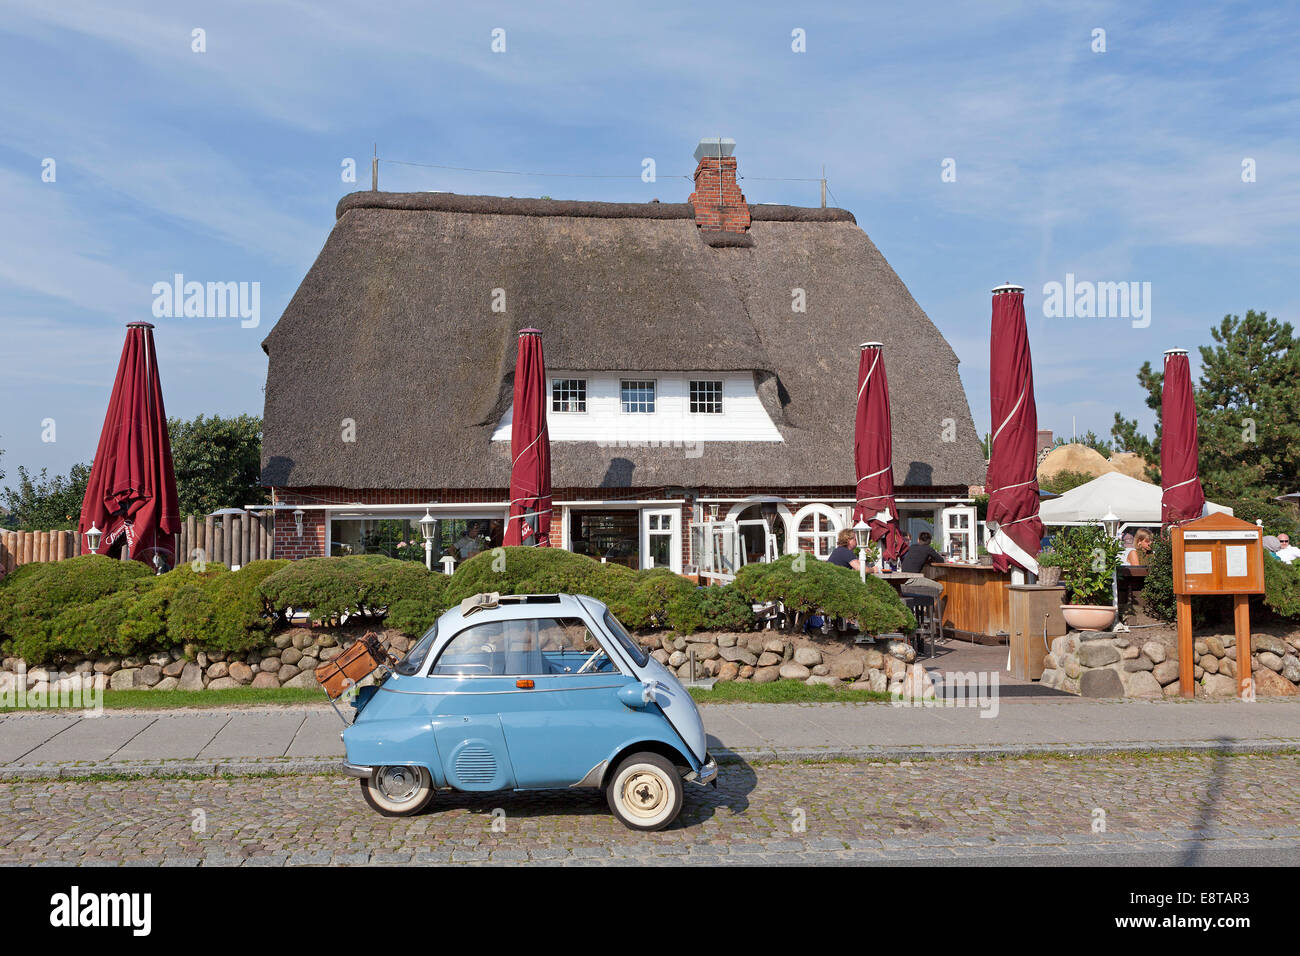 Isetta car in front of thatched house, Kampen, Sylt Island, Schleswig-Holstein, Germany Stock Photo